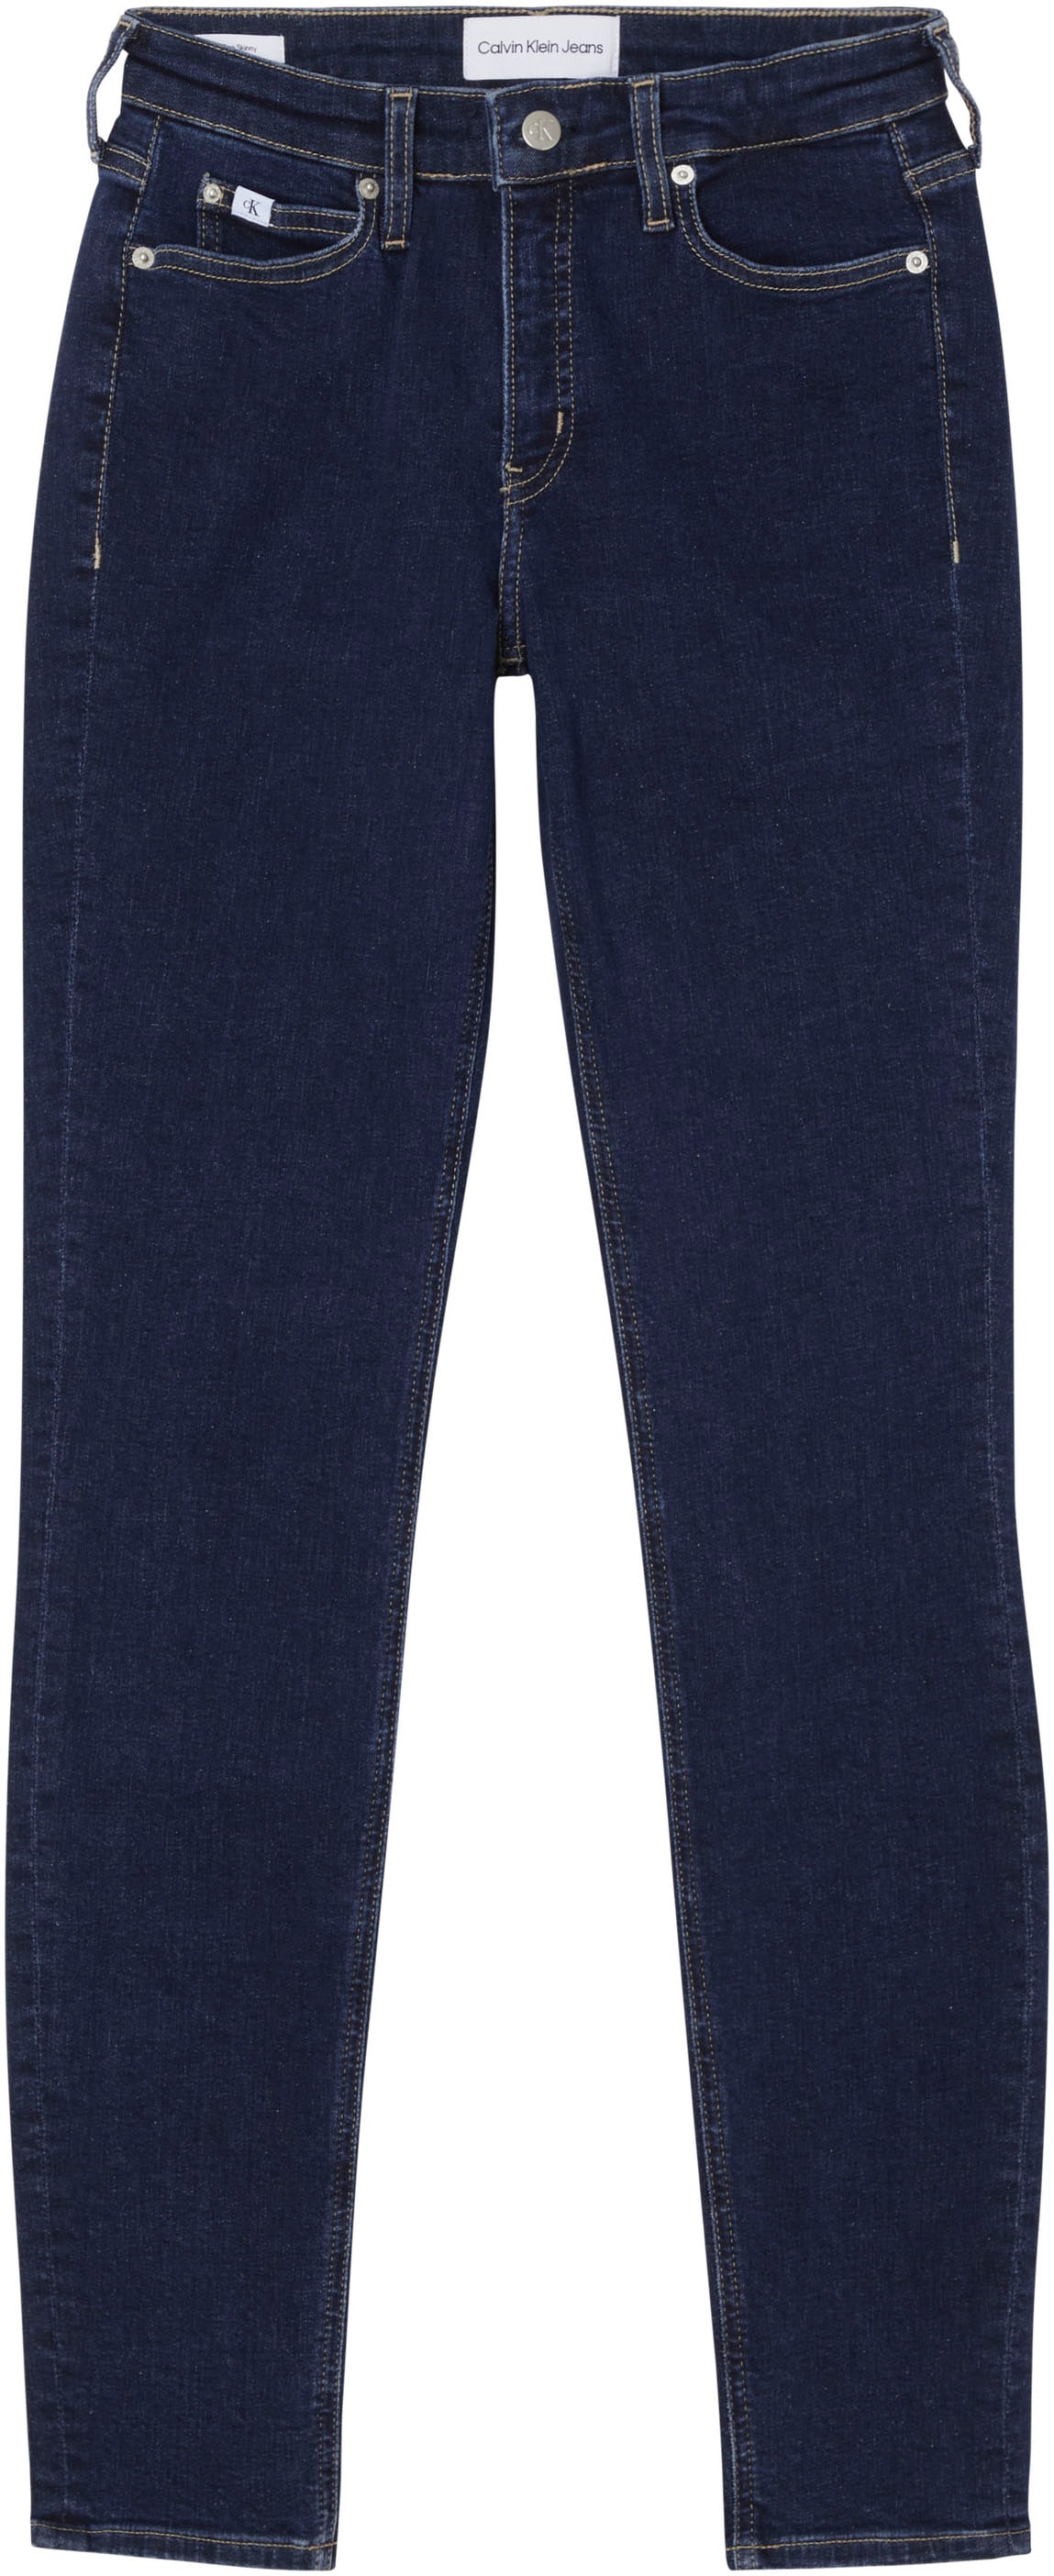 Calvin Klein Jeans Skinny-fit-Jeans »MID RISE SKINNY« im OTTO Online Shop